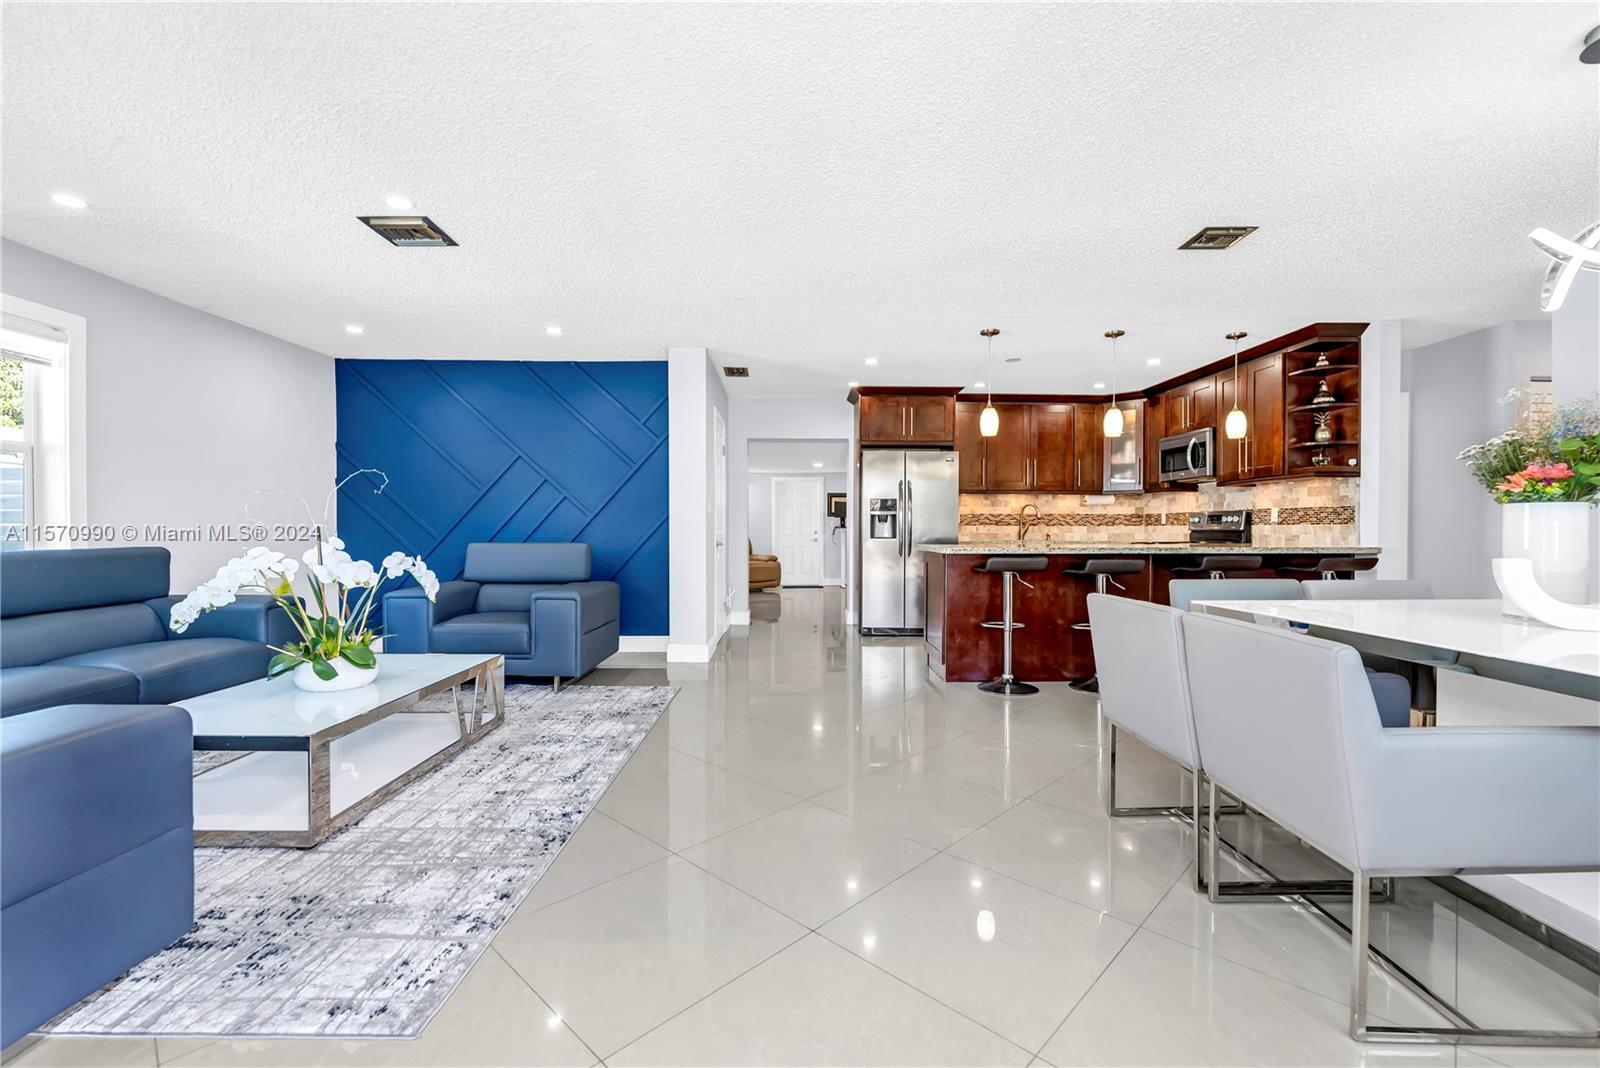 a living room with stainless steel appliances kitchen island granite countertop furniture and a kitchen view